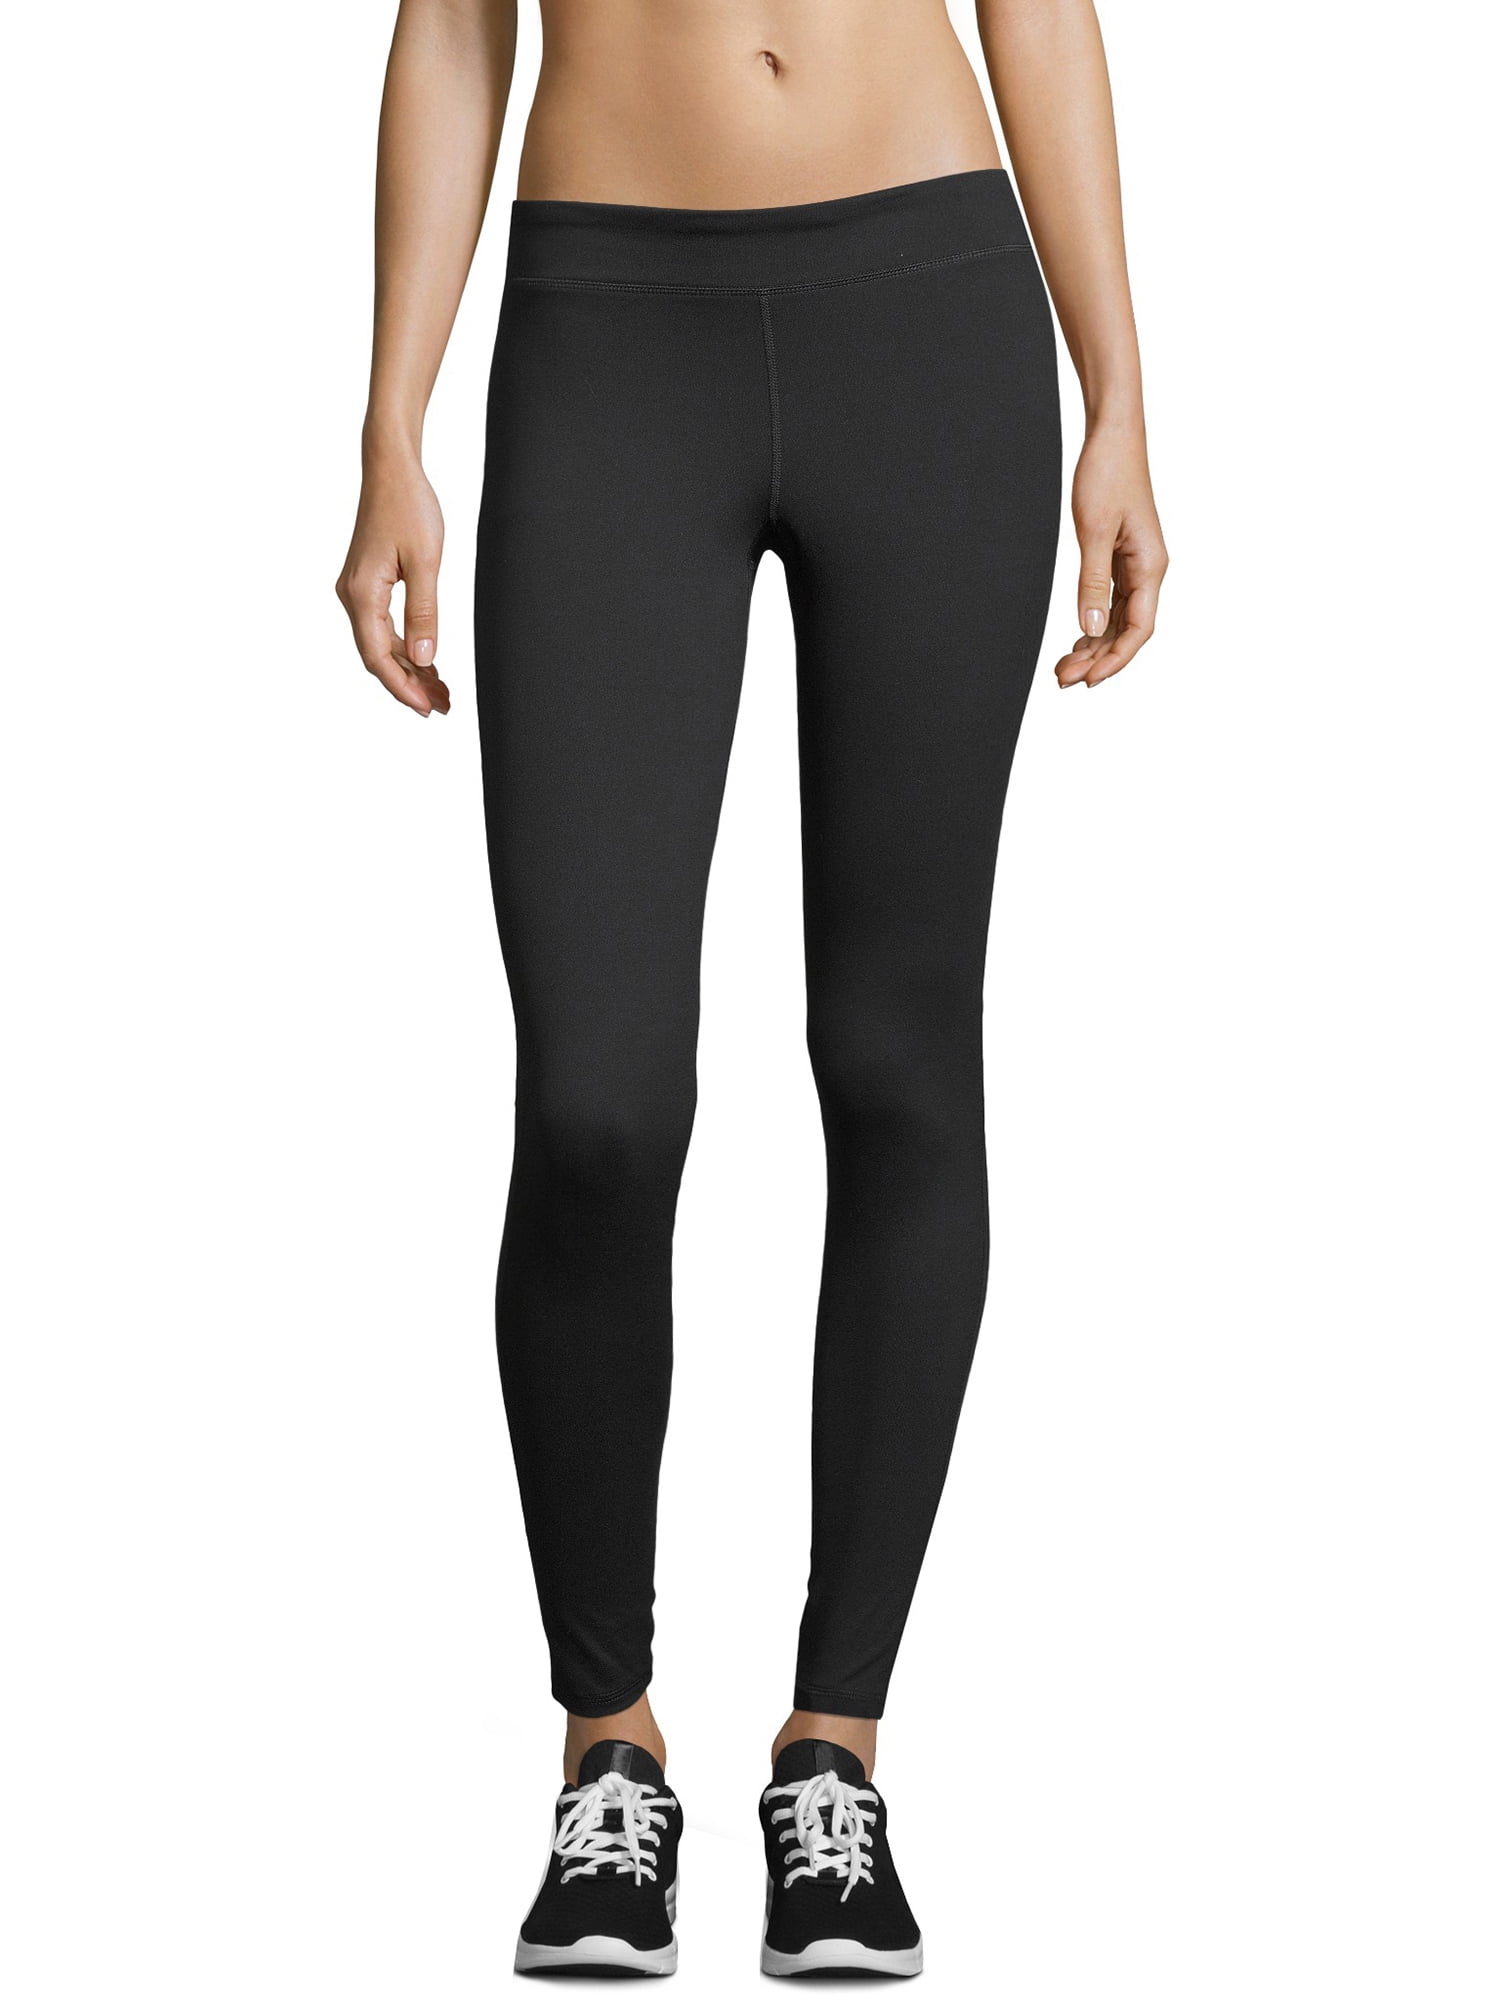 Hanes Women's Stretch Jersey Legging, Black, Small at